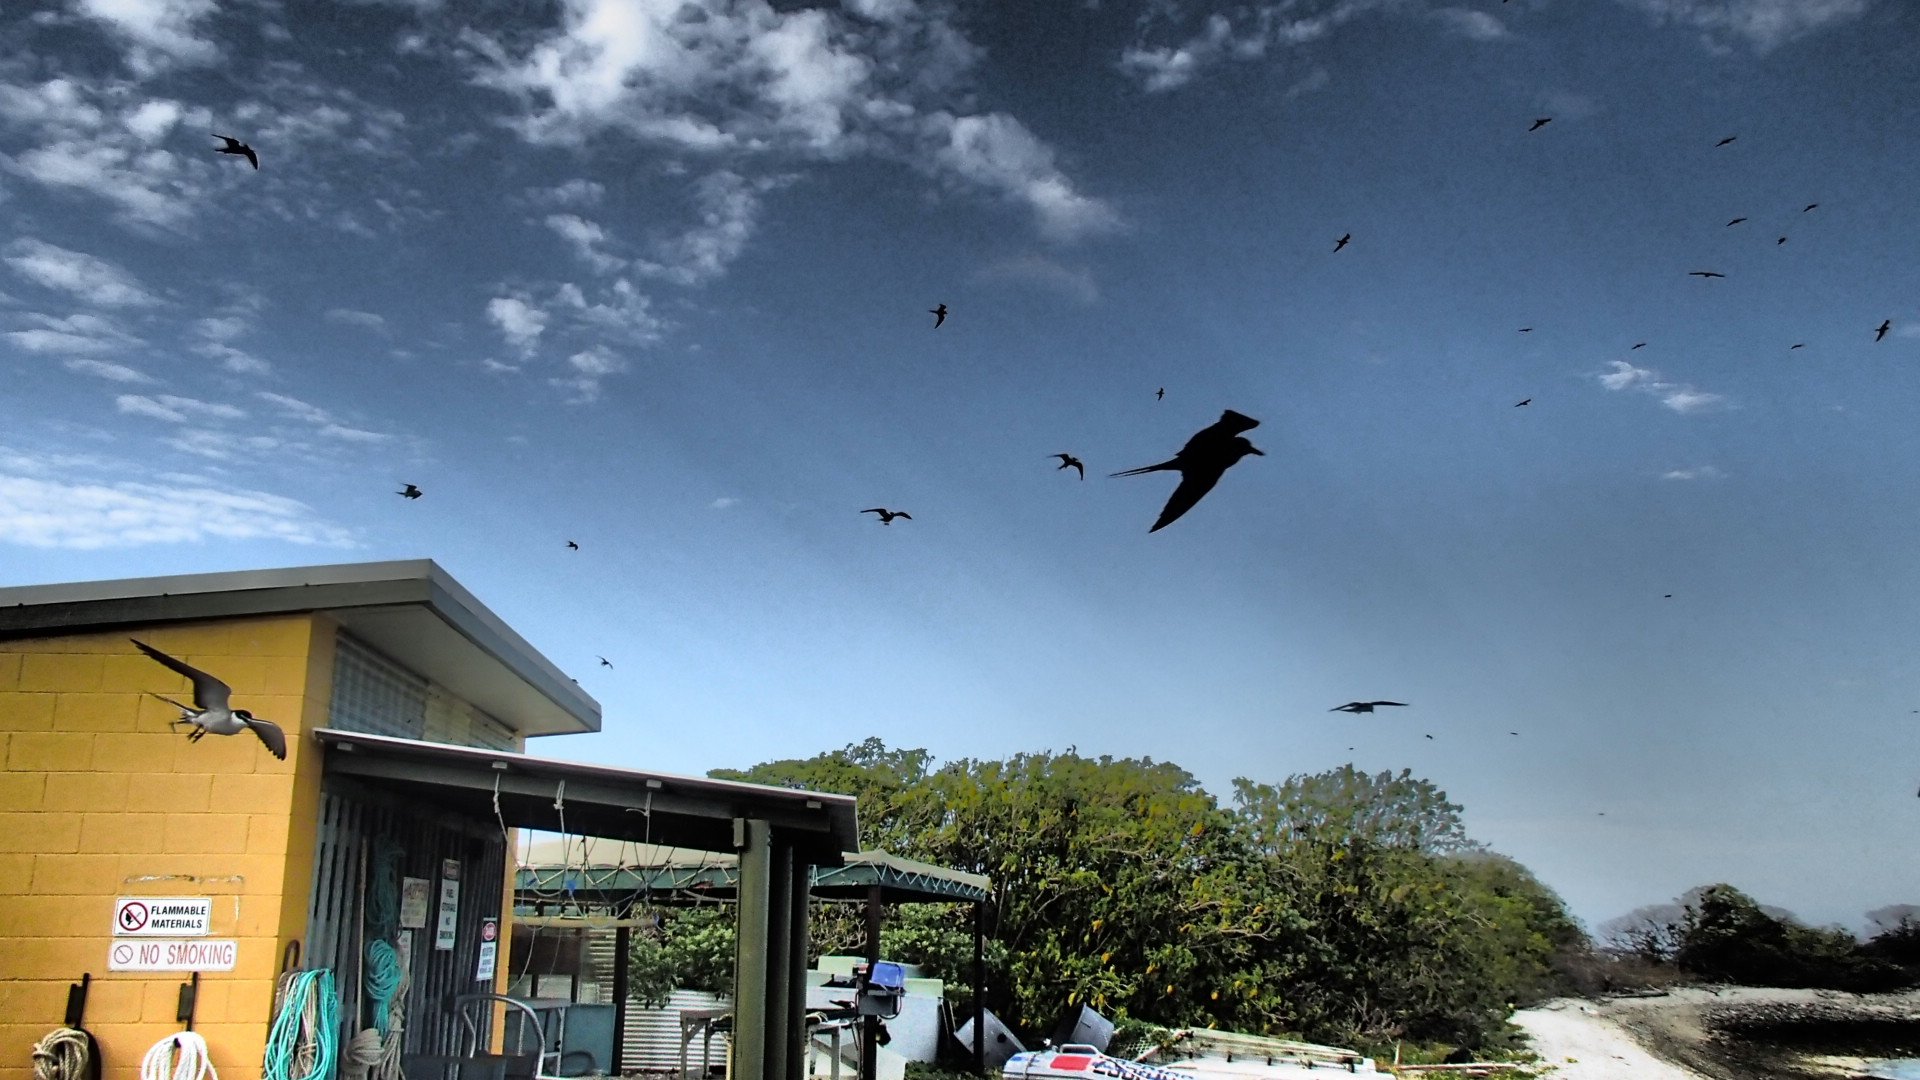  Strong winds mean that the island’s birds don’t even need to flap; they just glide at head height in the breeze in front of the research station.